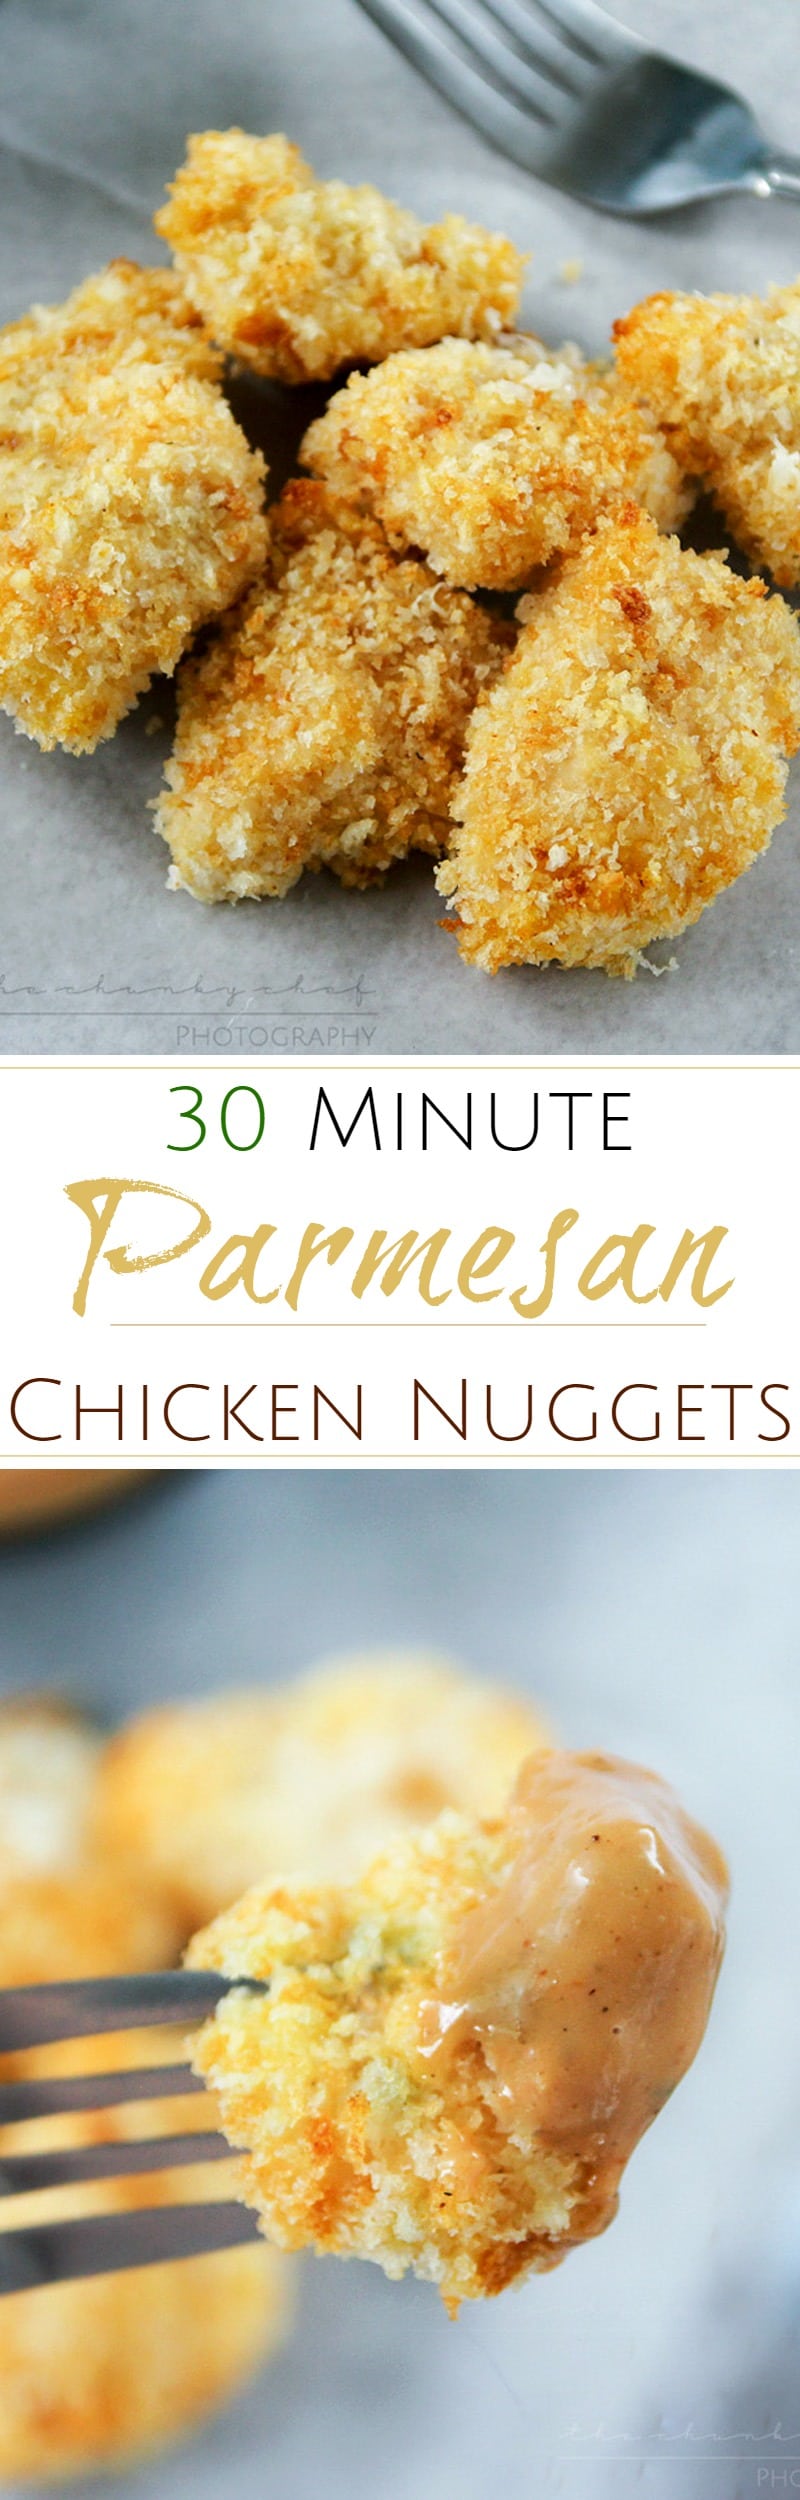 Parmesan Crusted Chicken Nuggets | The Chunky Chef | Amazingly crispy and flavorful baked Parmesan crusted chicken nuggets that both kids and adults will love! Ready in 30 minutes!